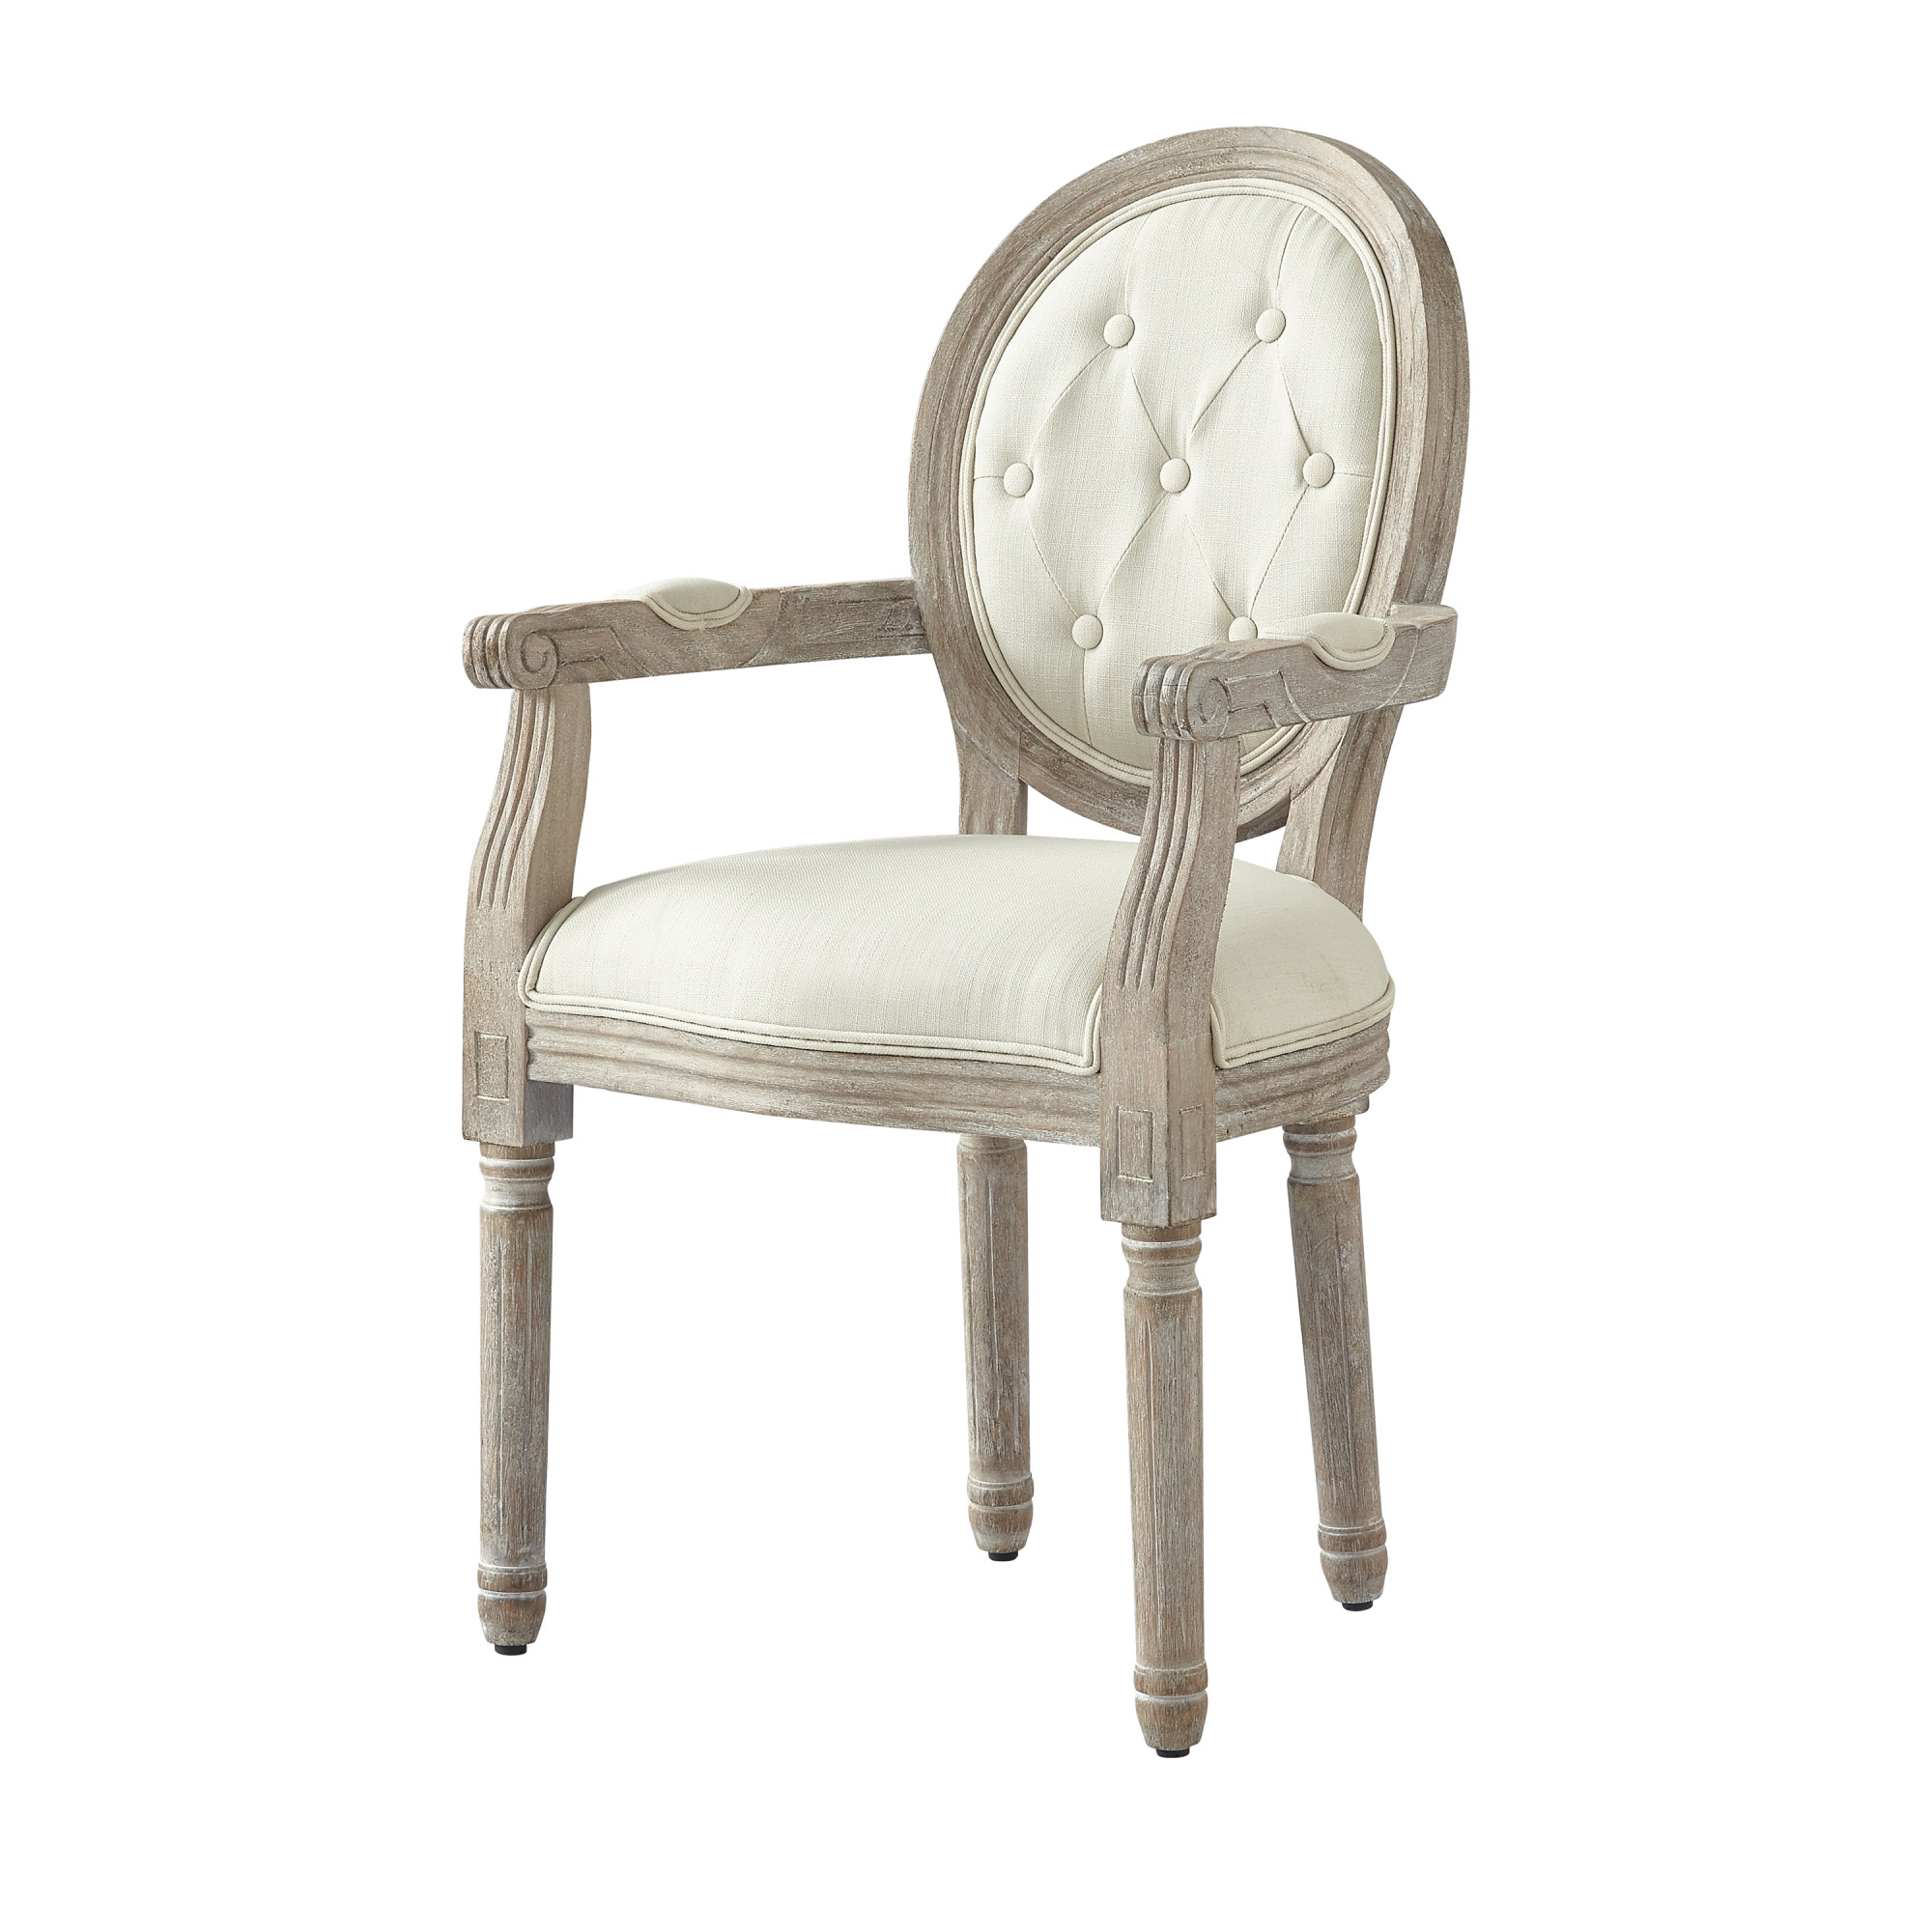 Tufted Cream and Brown Upholstered Linen Dining Arm Chair-535371-1